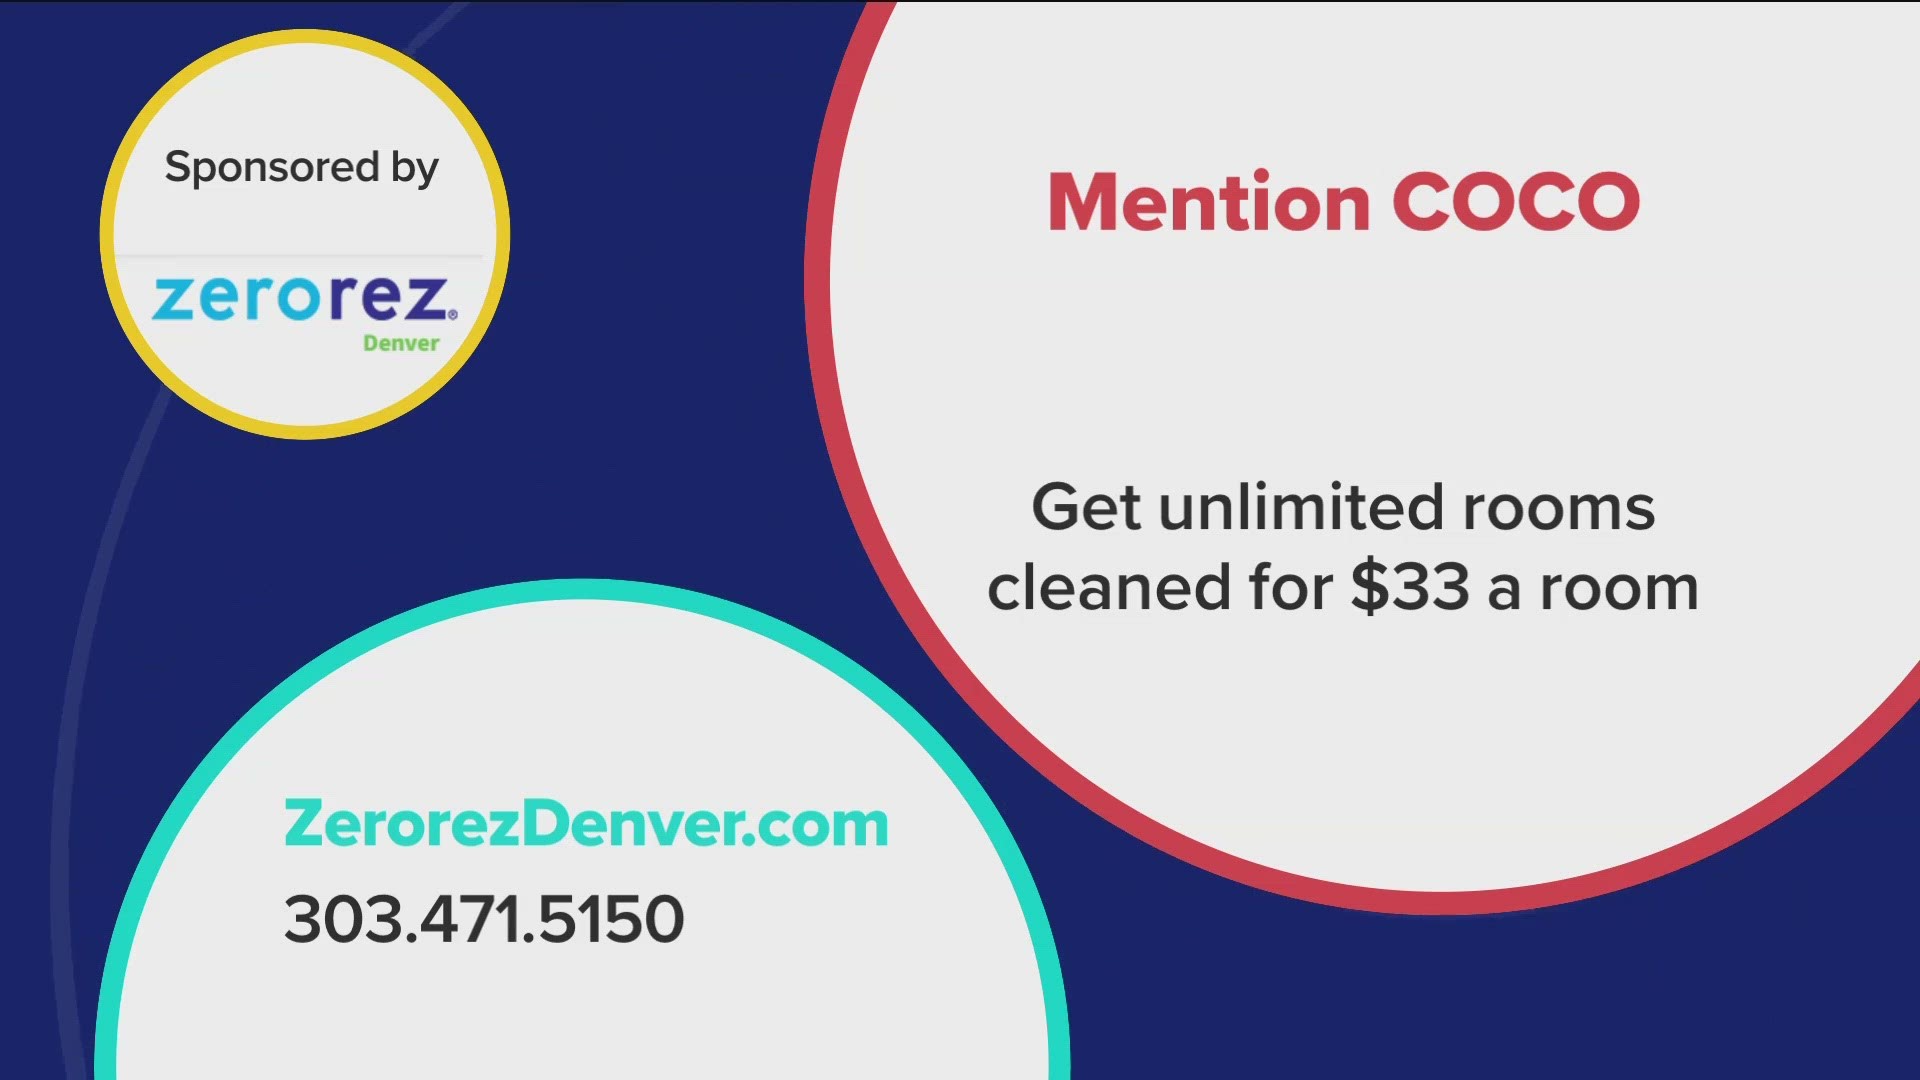 Right now you can get an unlimited number of rooms cleaned for just $33/room! Learn more at ZerorezDenver.com. **PAID CONTENT**